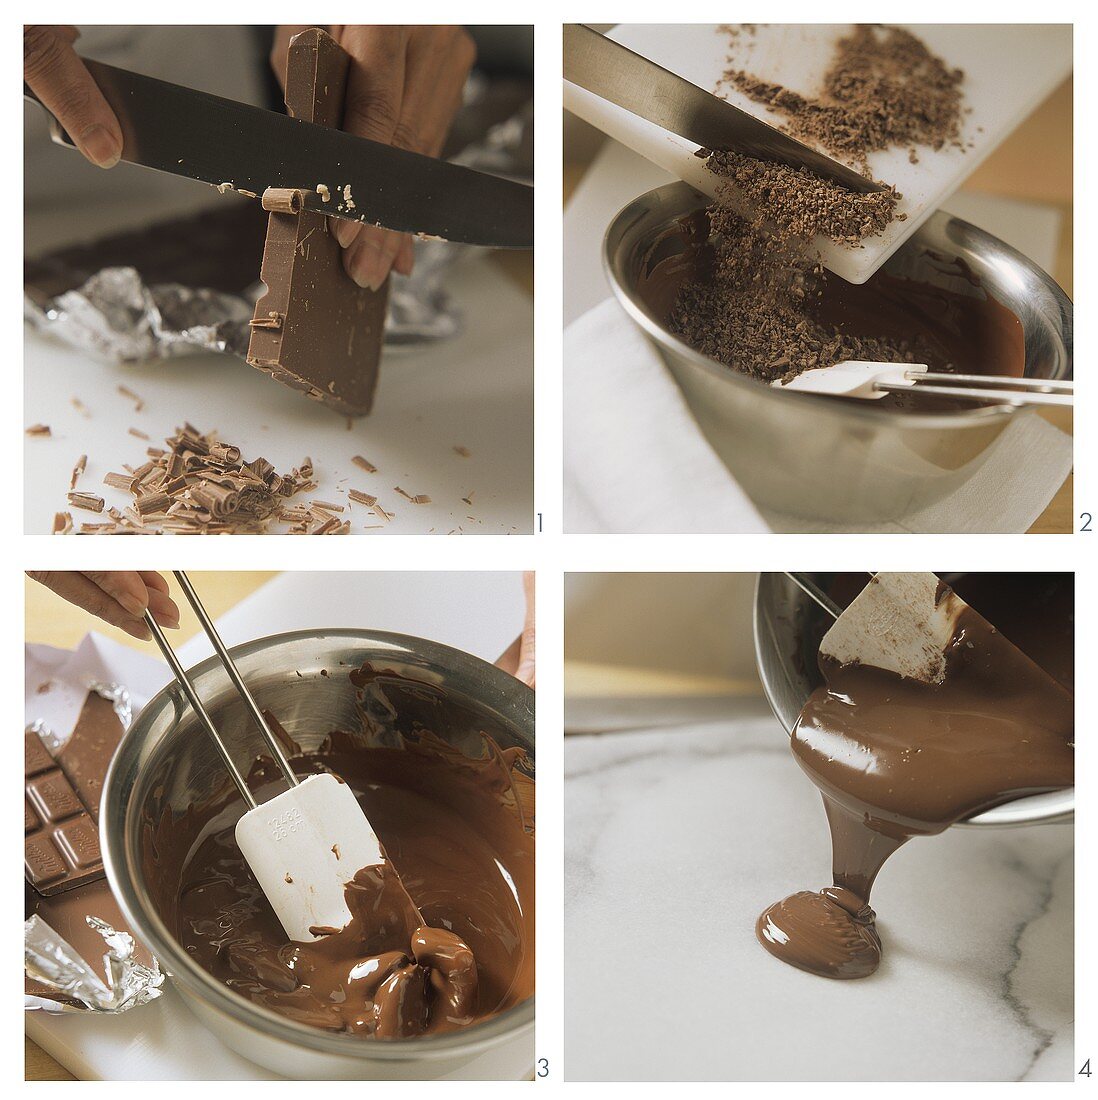 Grating, melting and spreading chocolate